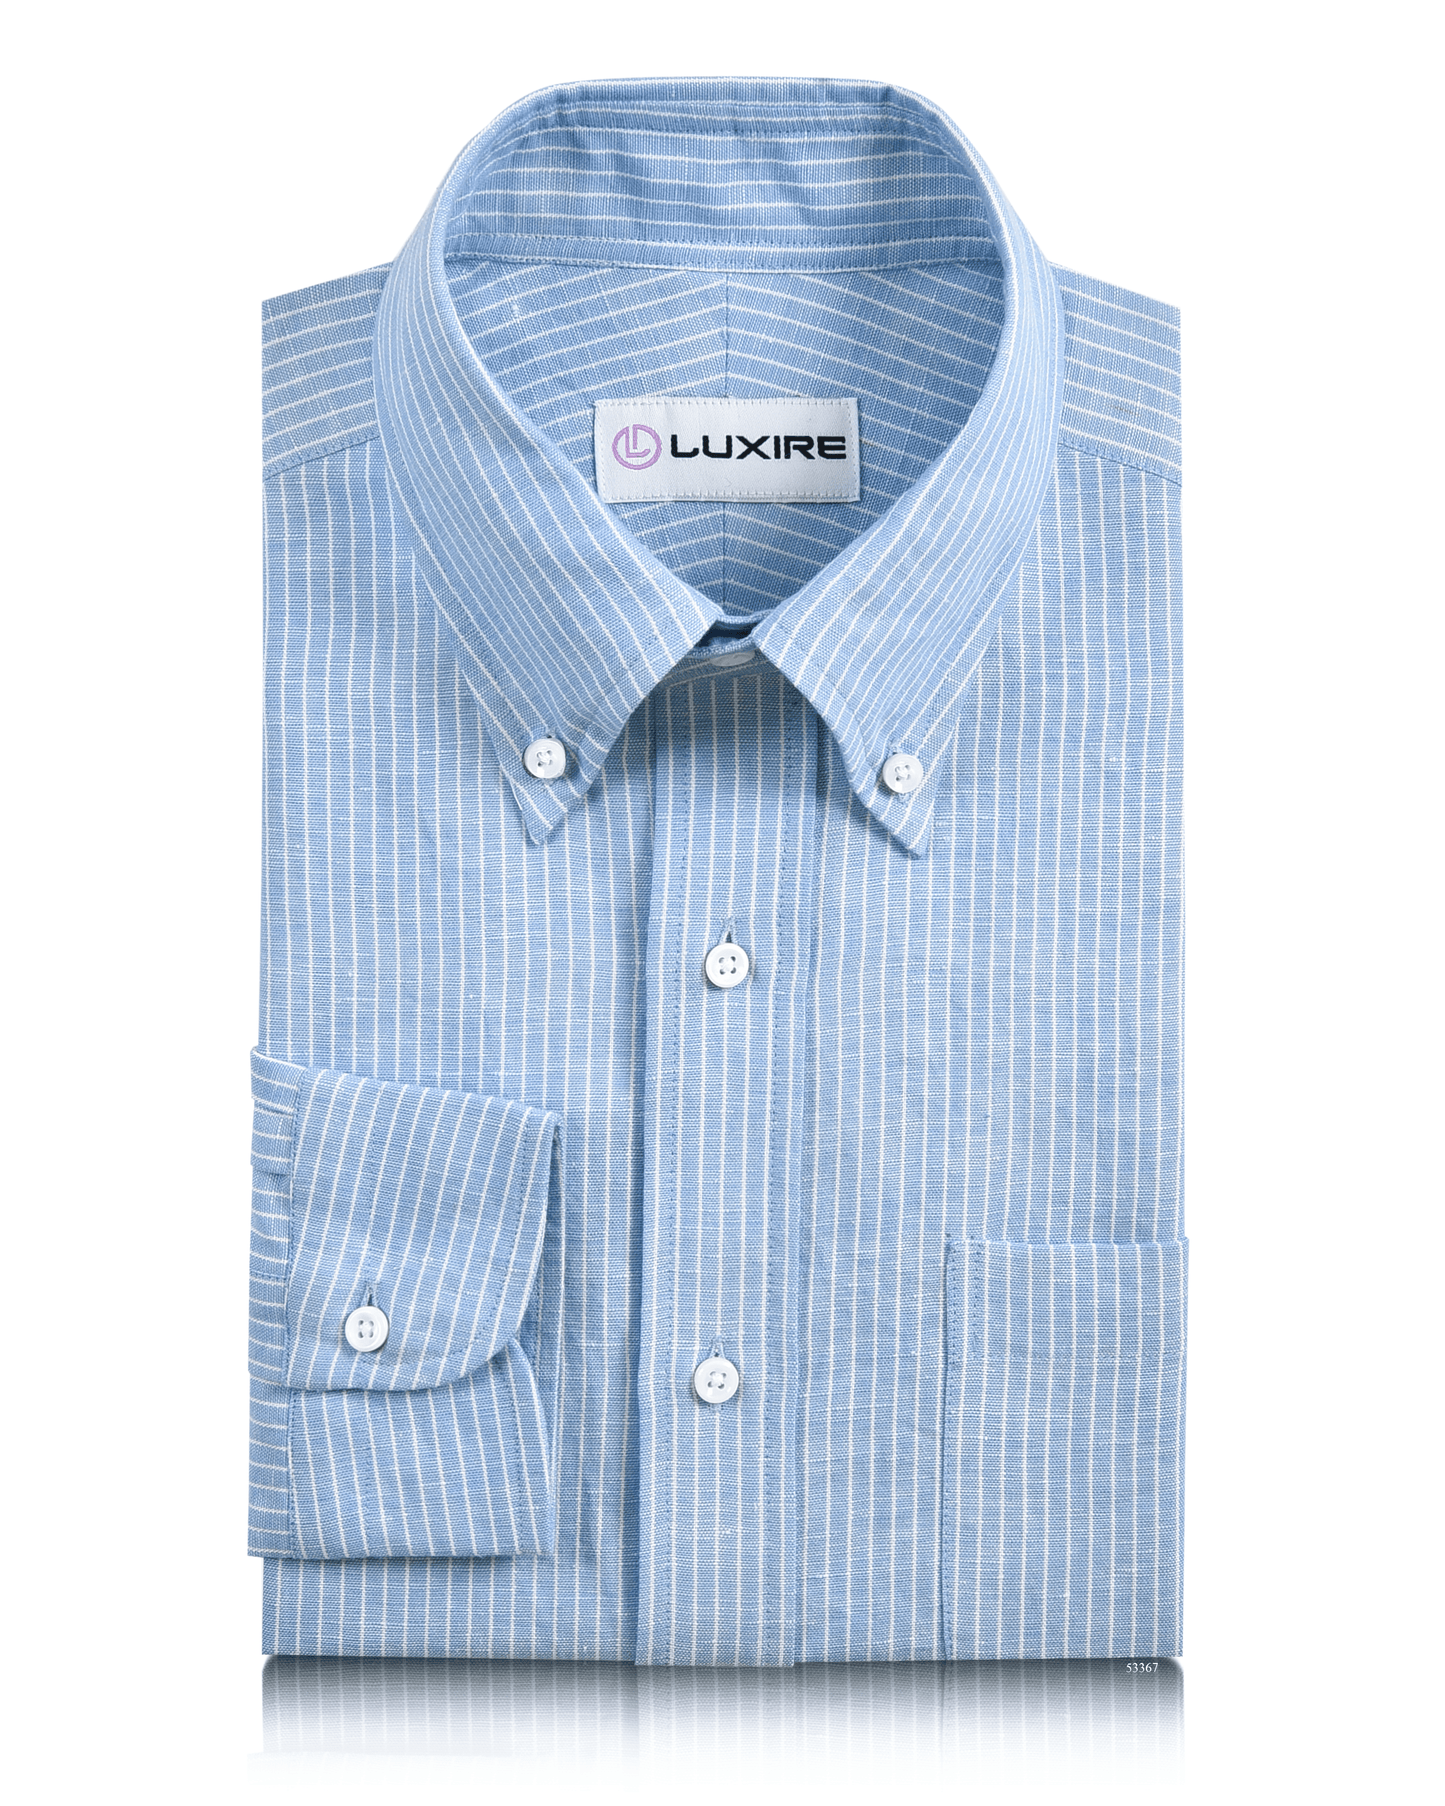 Front of the custom linen shirt for men in blue with white pinstripes by Luxire Clothing